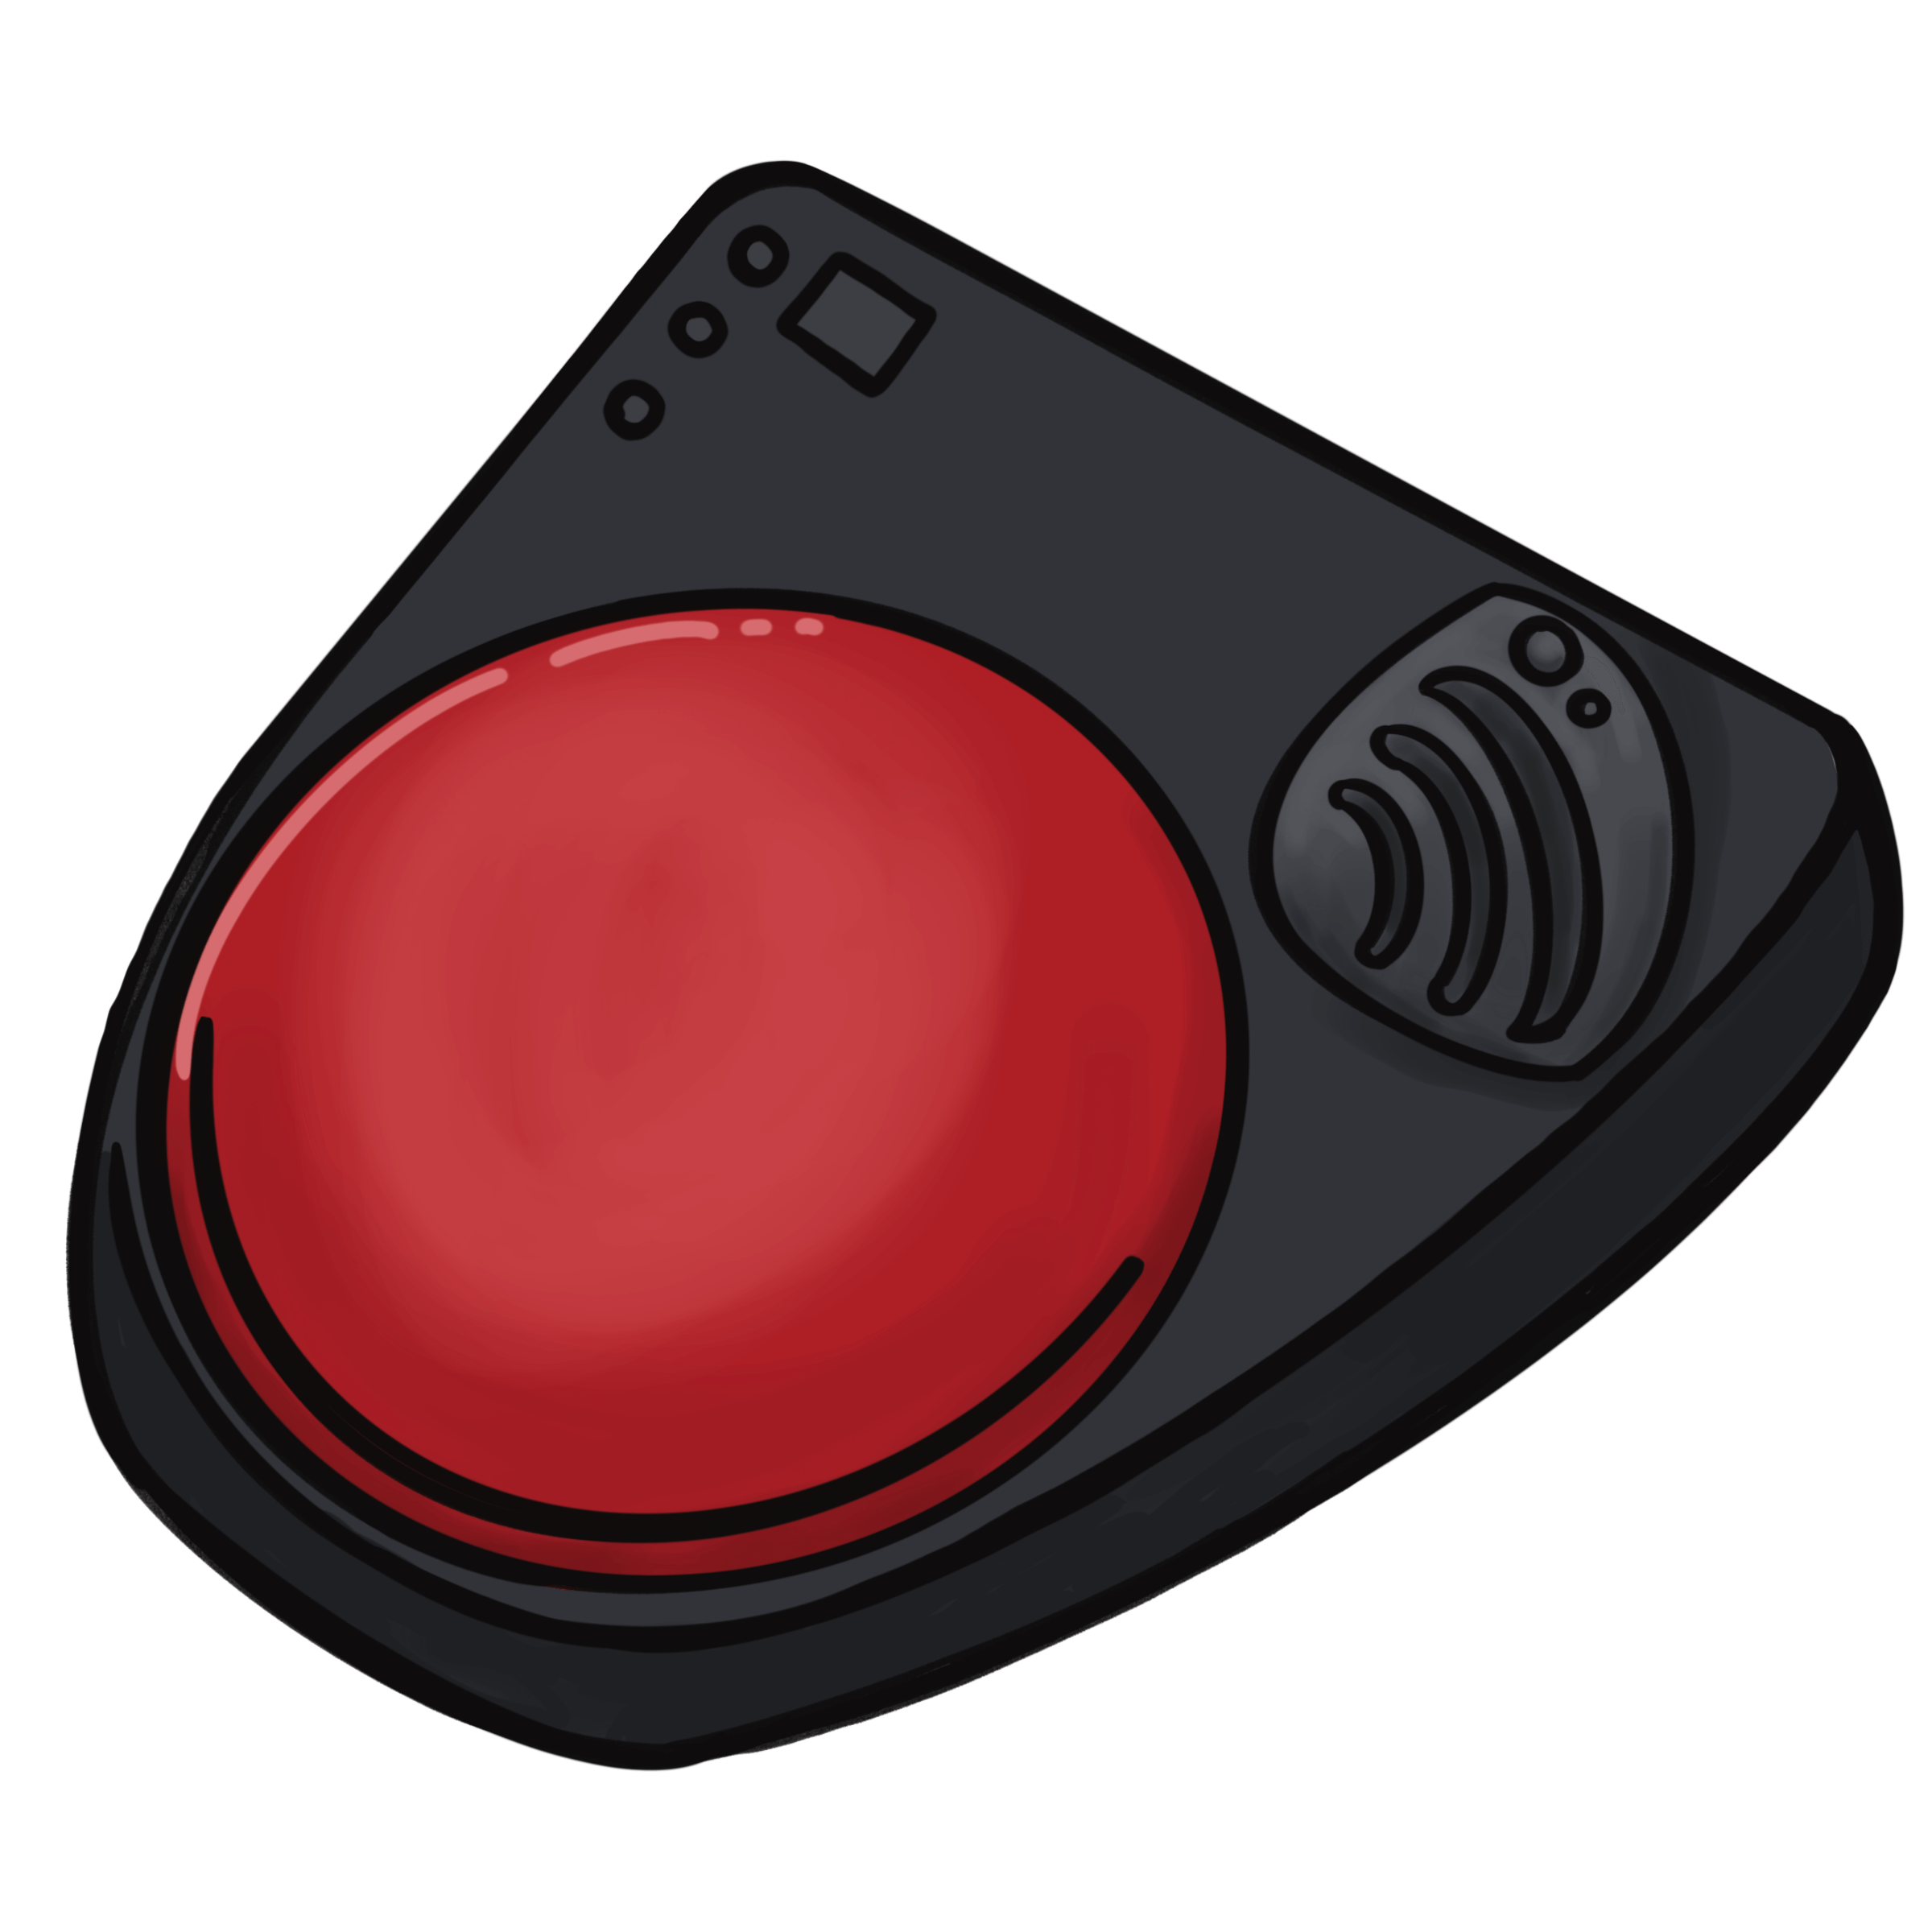 Drawn image of an AAC device (large single button)